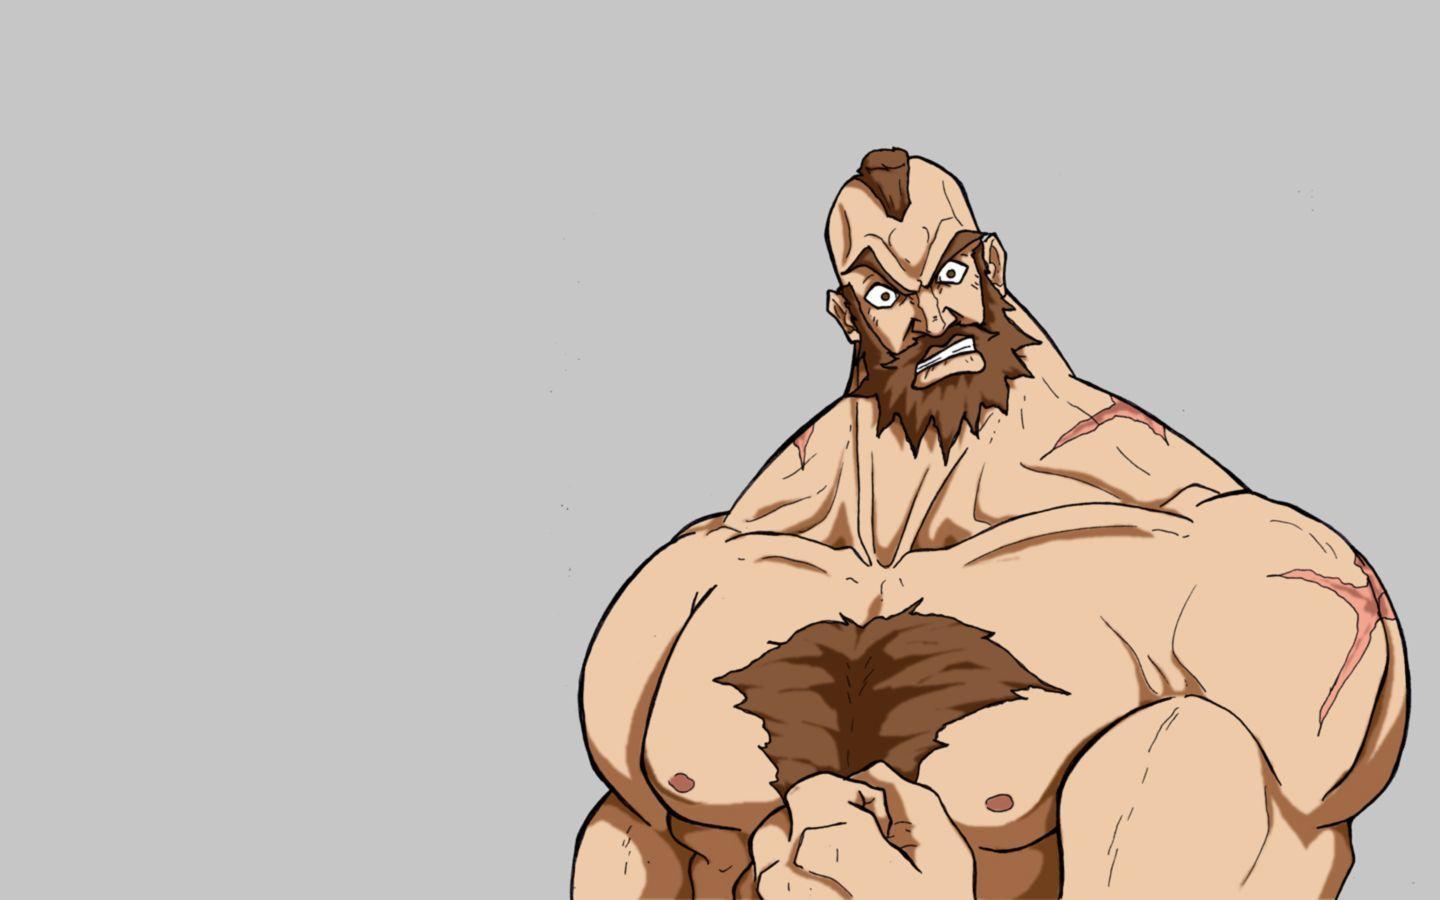 Zangief in Street Fighter V wallpaper - Game wallpapers - #53797